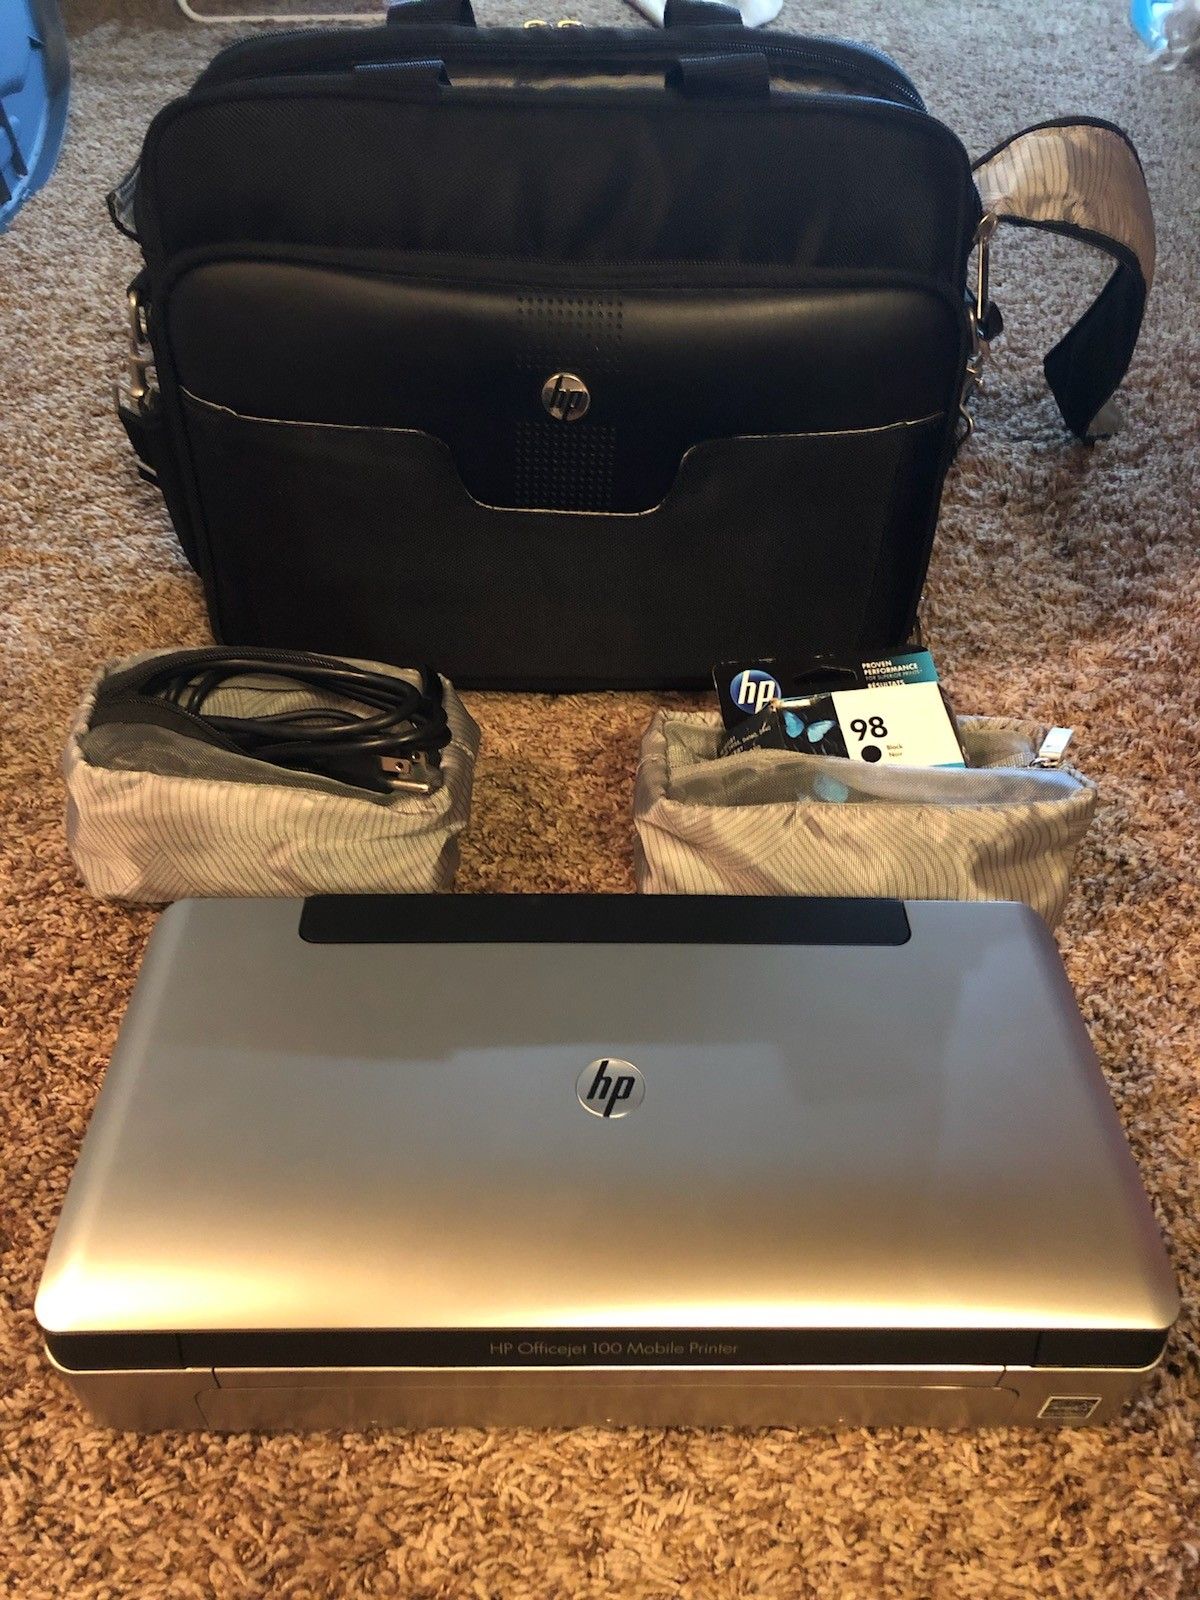 HP moblie printer with bag, ink and case